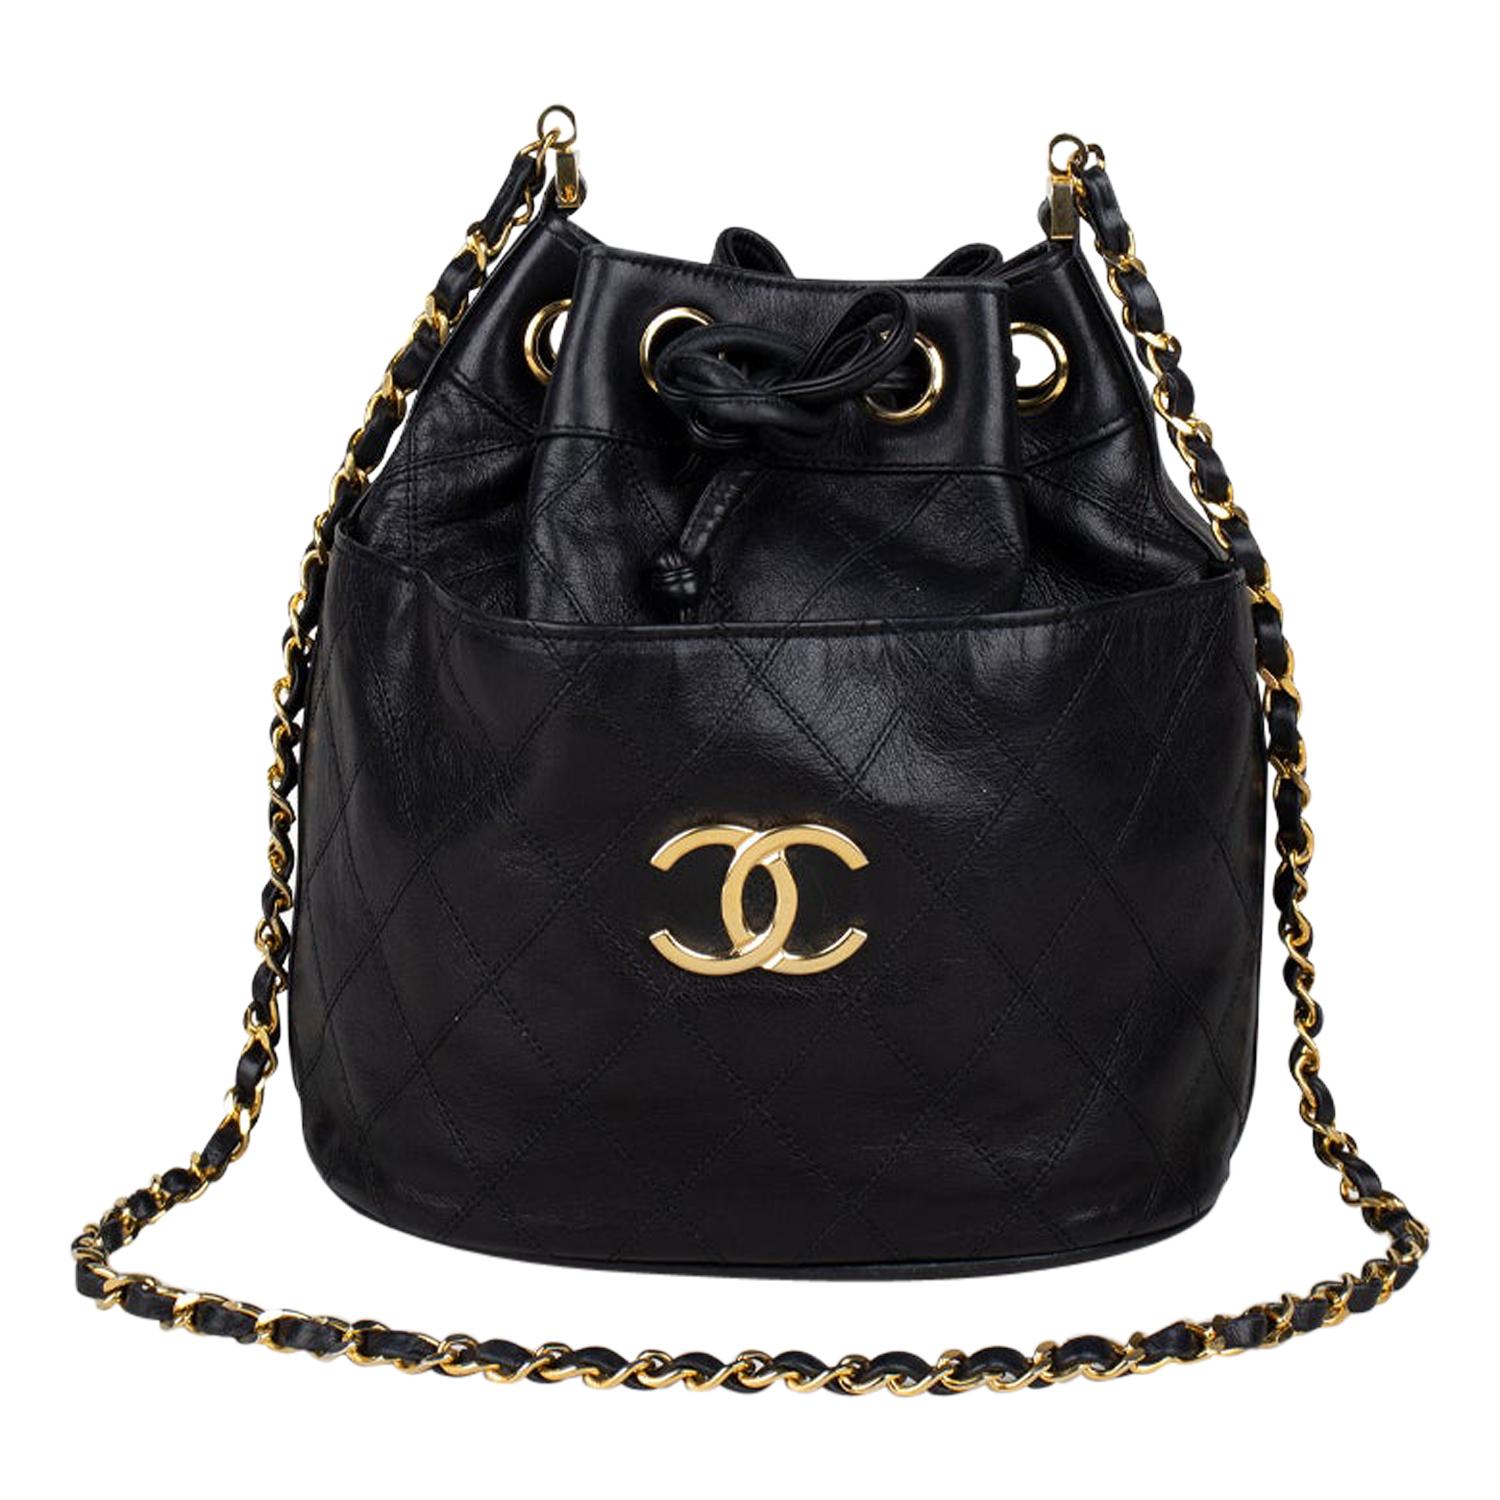 Chanel Black Quilted Grained Calfskin Bucket Bag